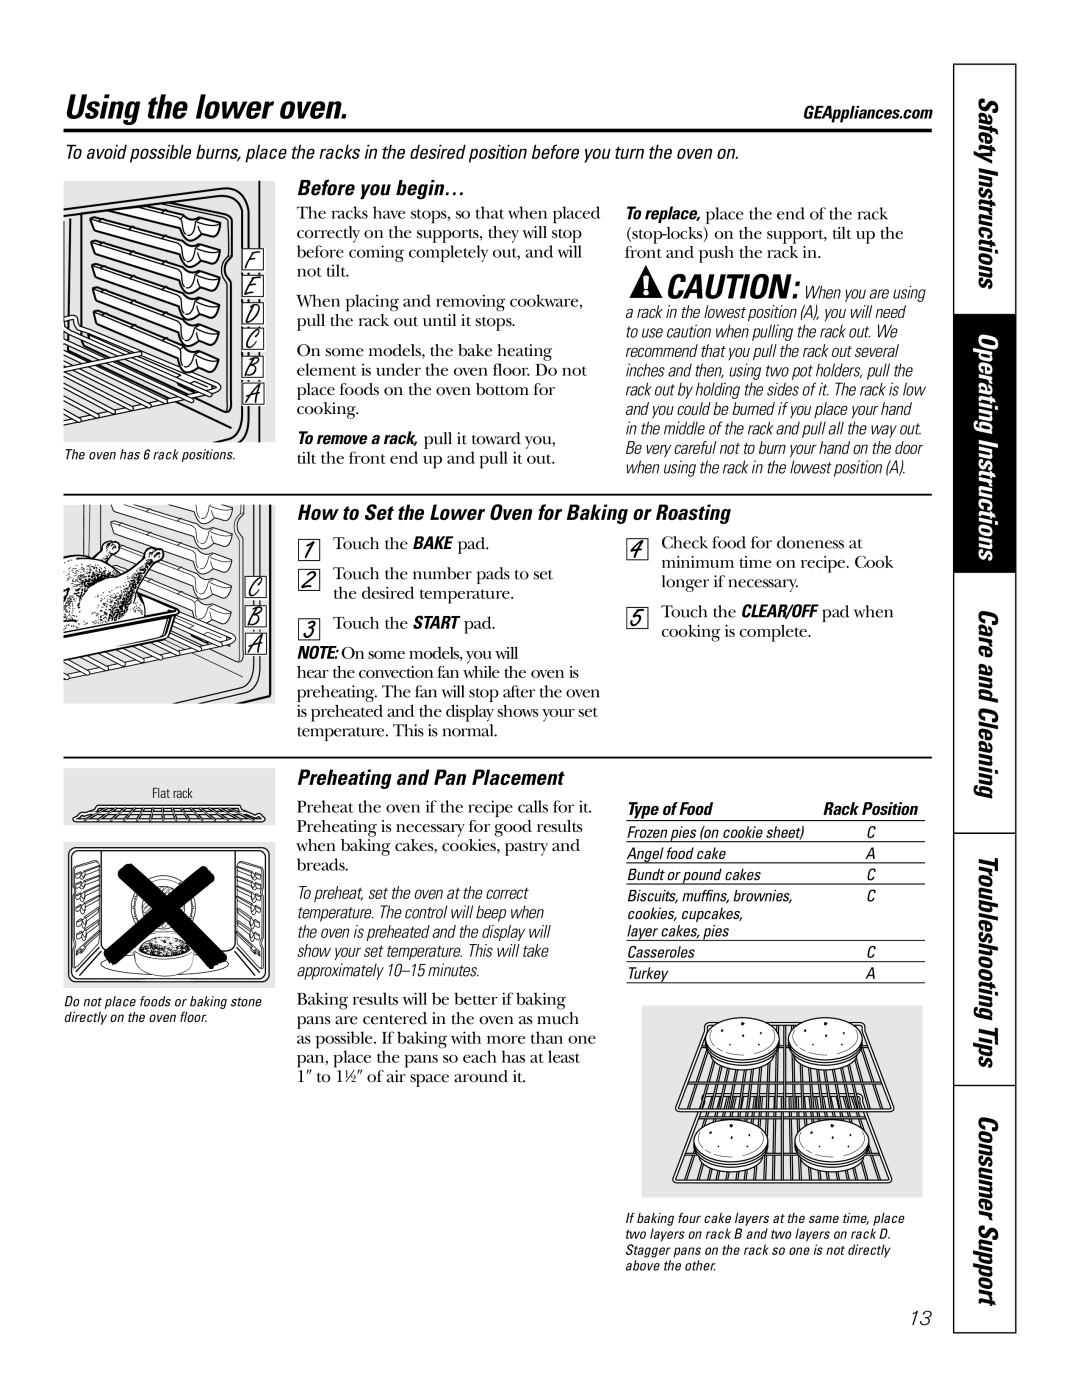 GE PB976 Safety, Support, Troubleshooting Tips Consumer, Before you begin…, Preheating and Pan Placement, Type of Food 